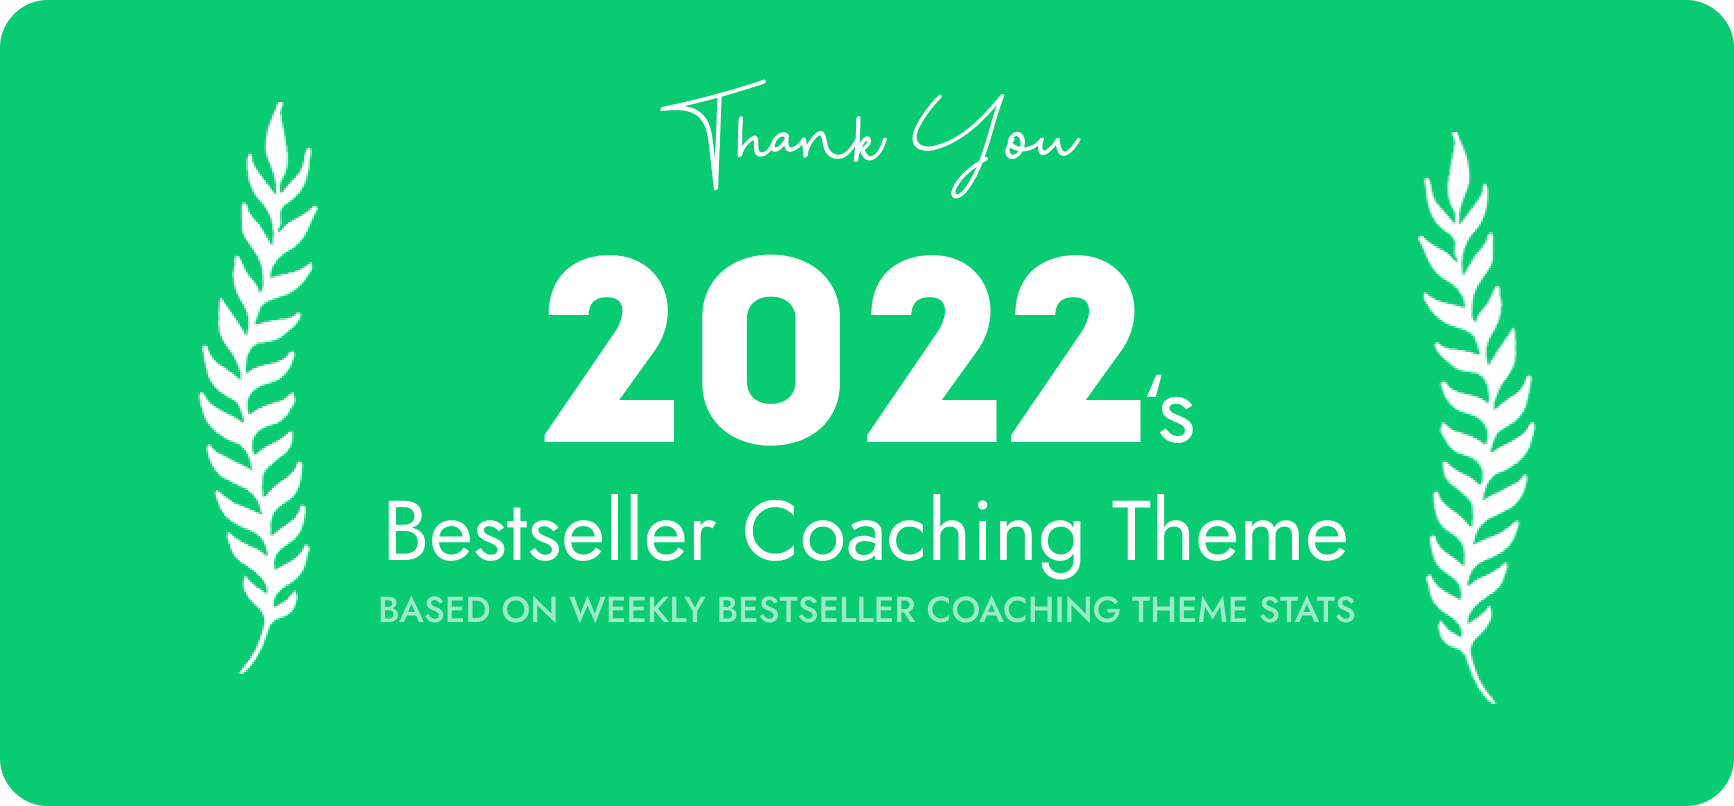 bestseller coaching theme of 2022 by pixelwars - efor wordpress coaching theme for coaches